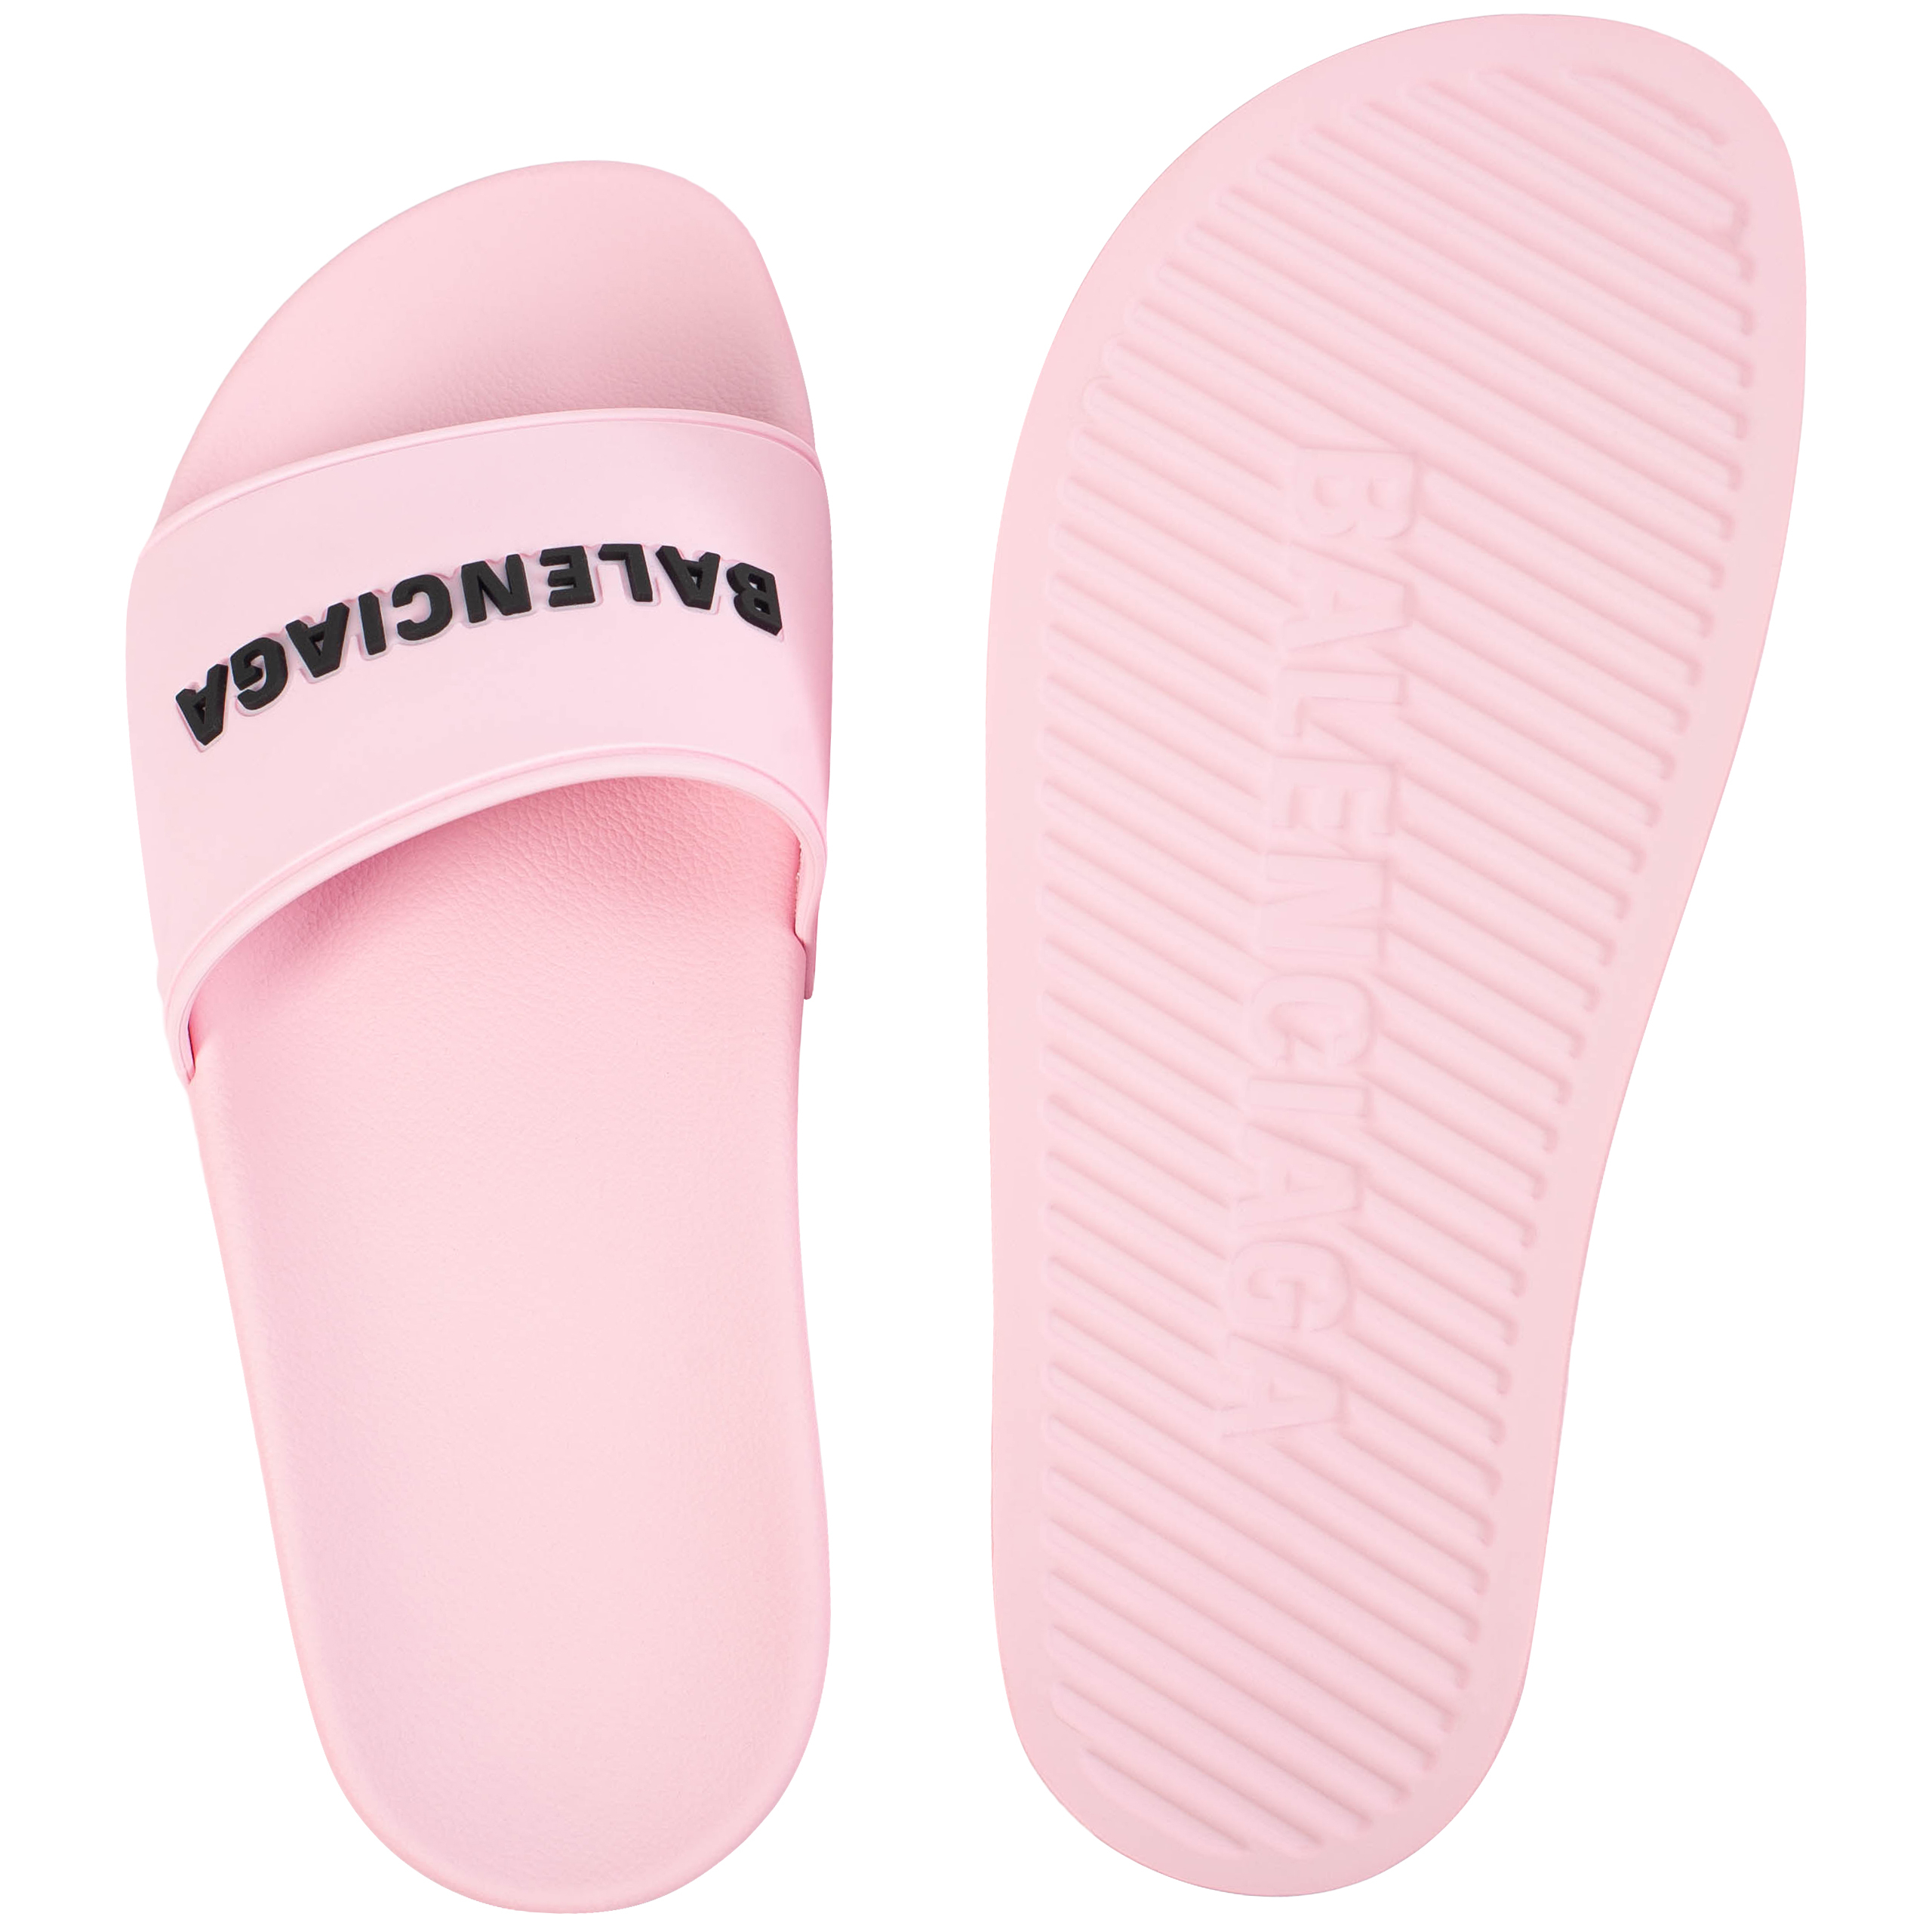 Get the Balenciaga Pool Slide Sandal in Pink from SV77 now ...